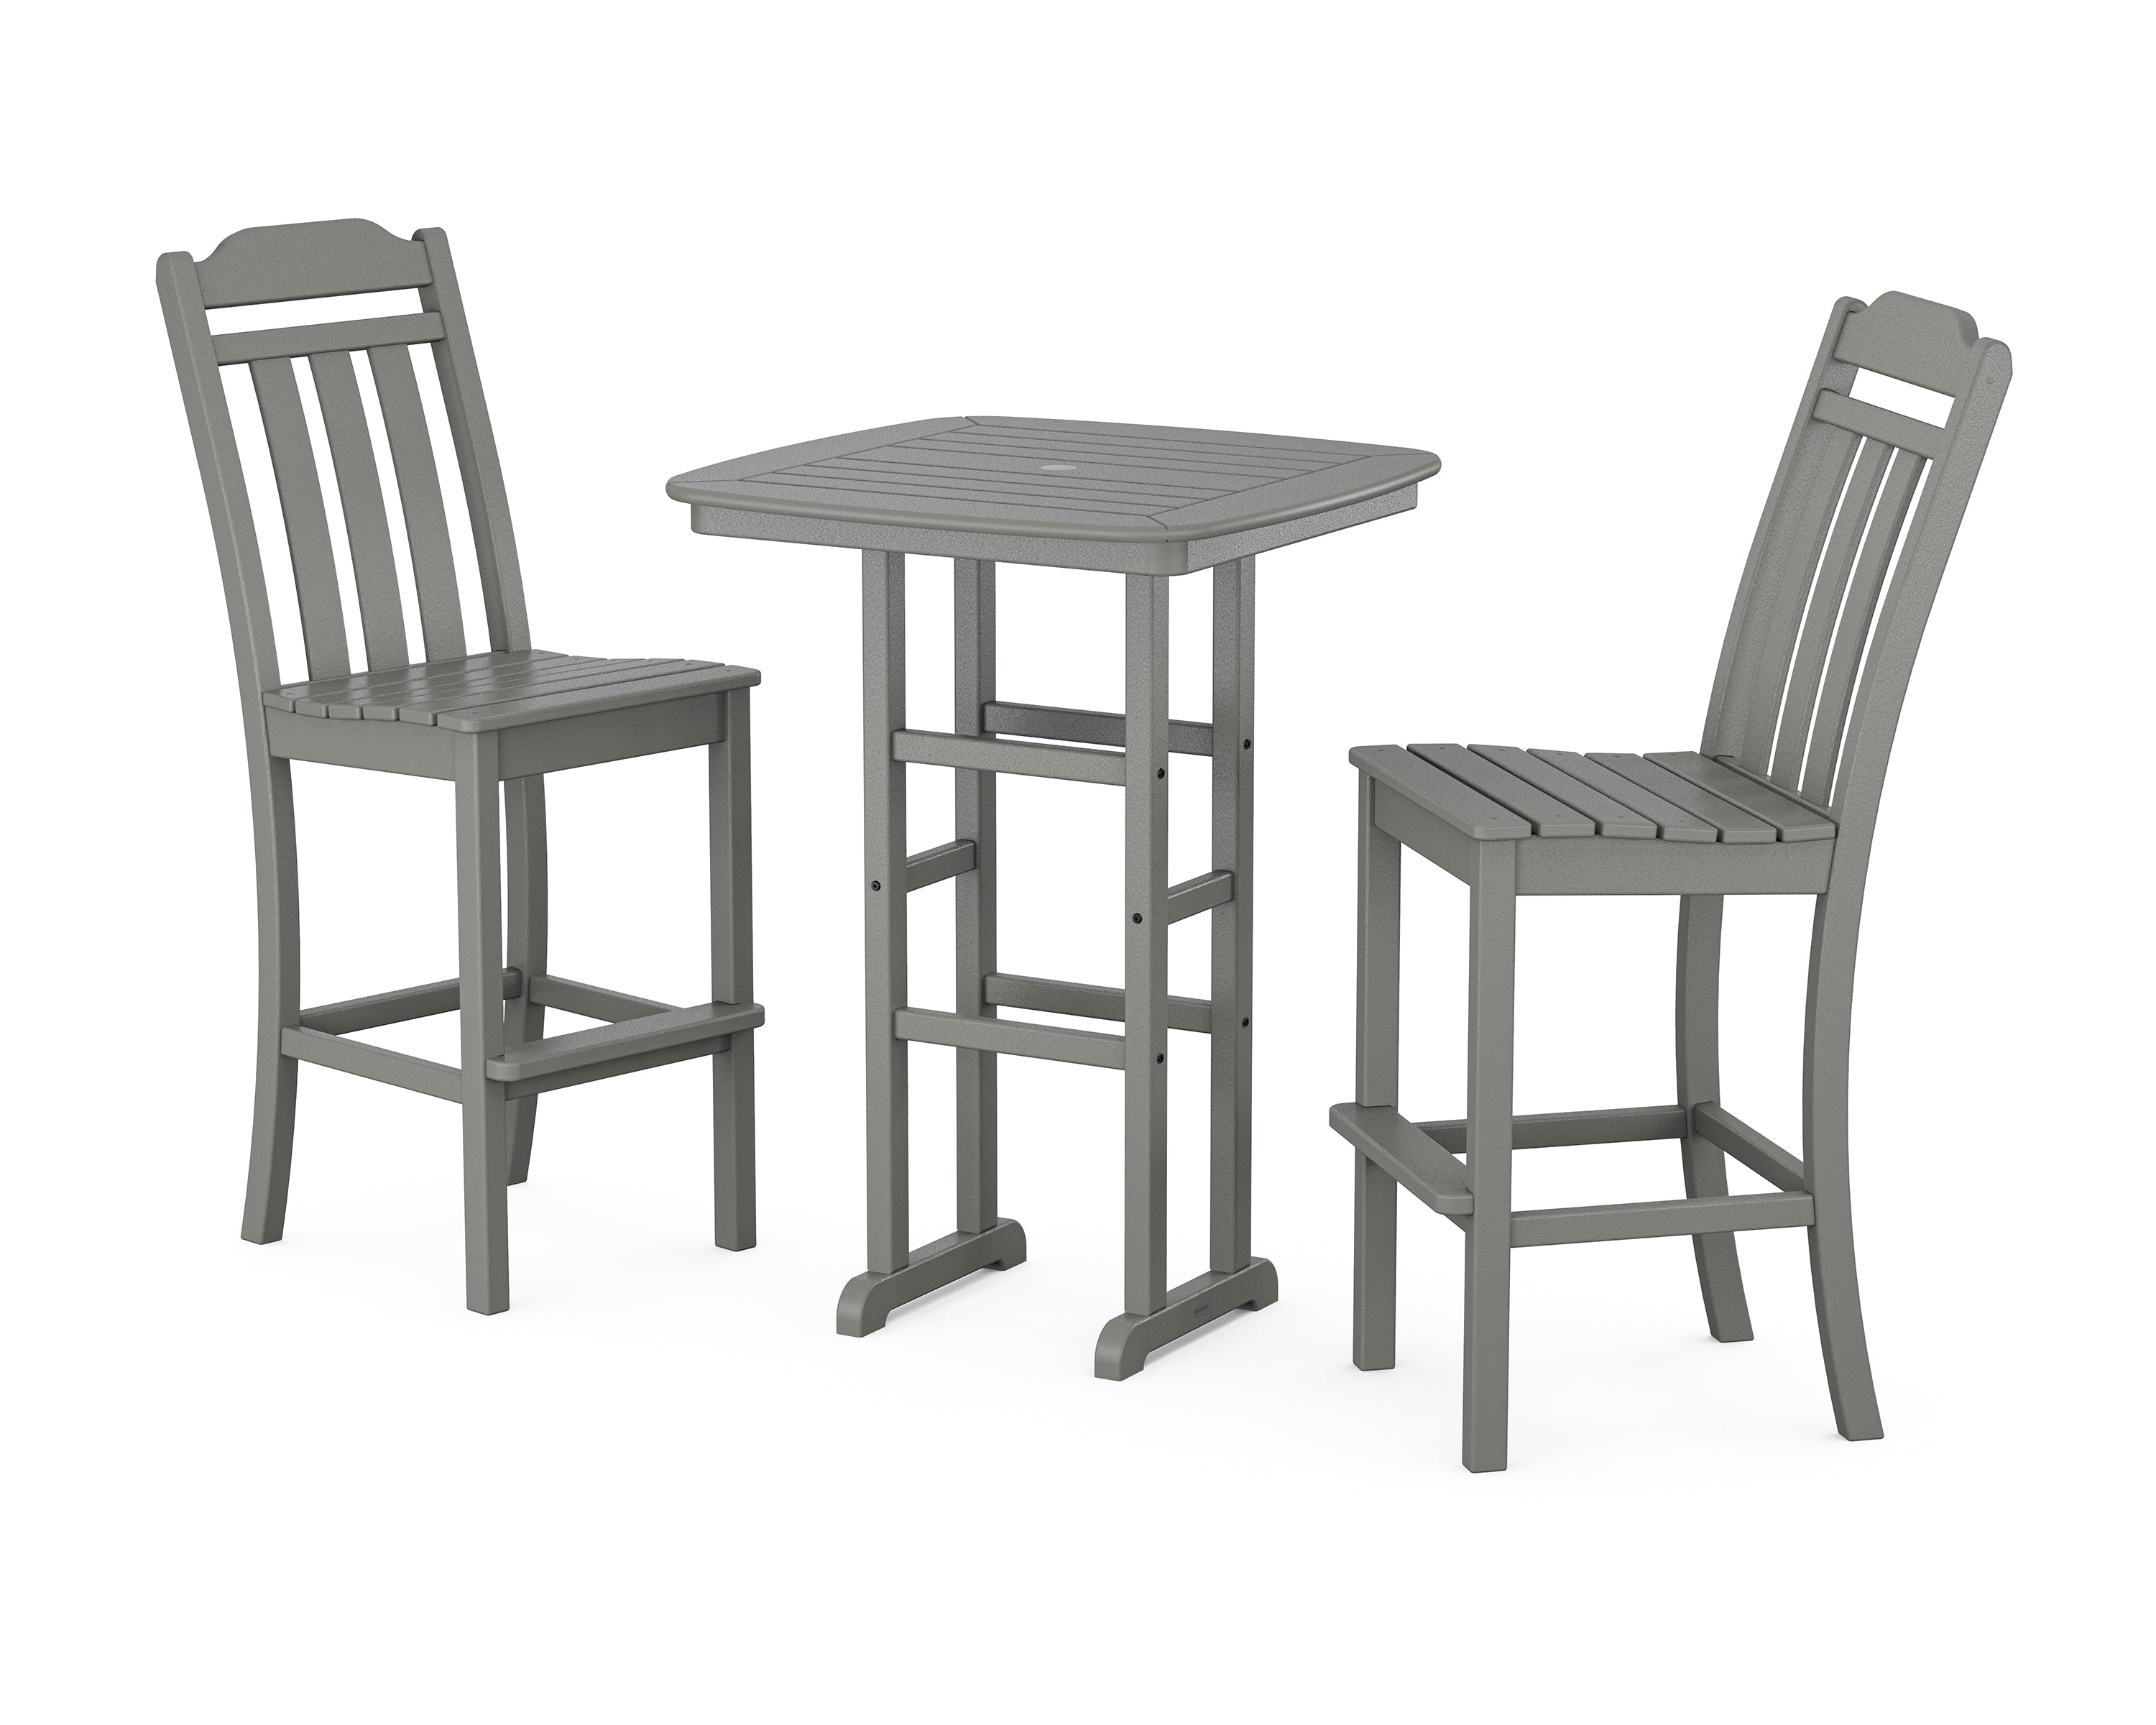 POLYWOOD Country Living 3-Piece Bar Set in Slate Grey